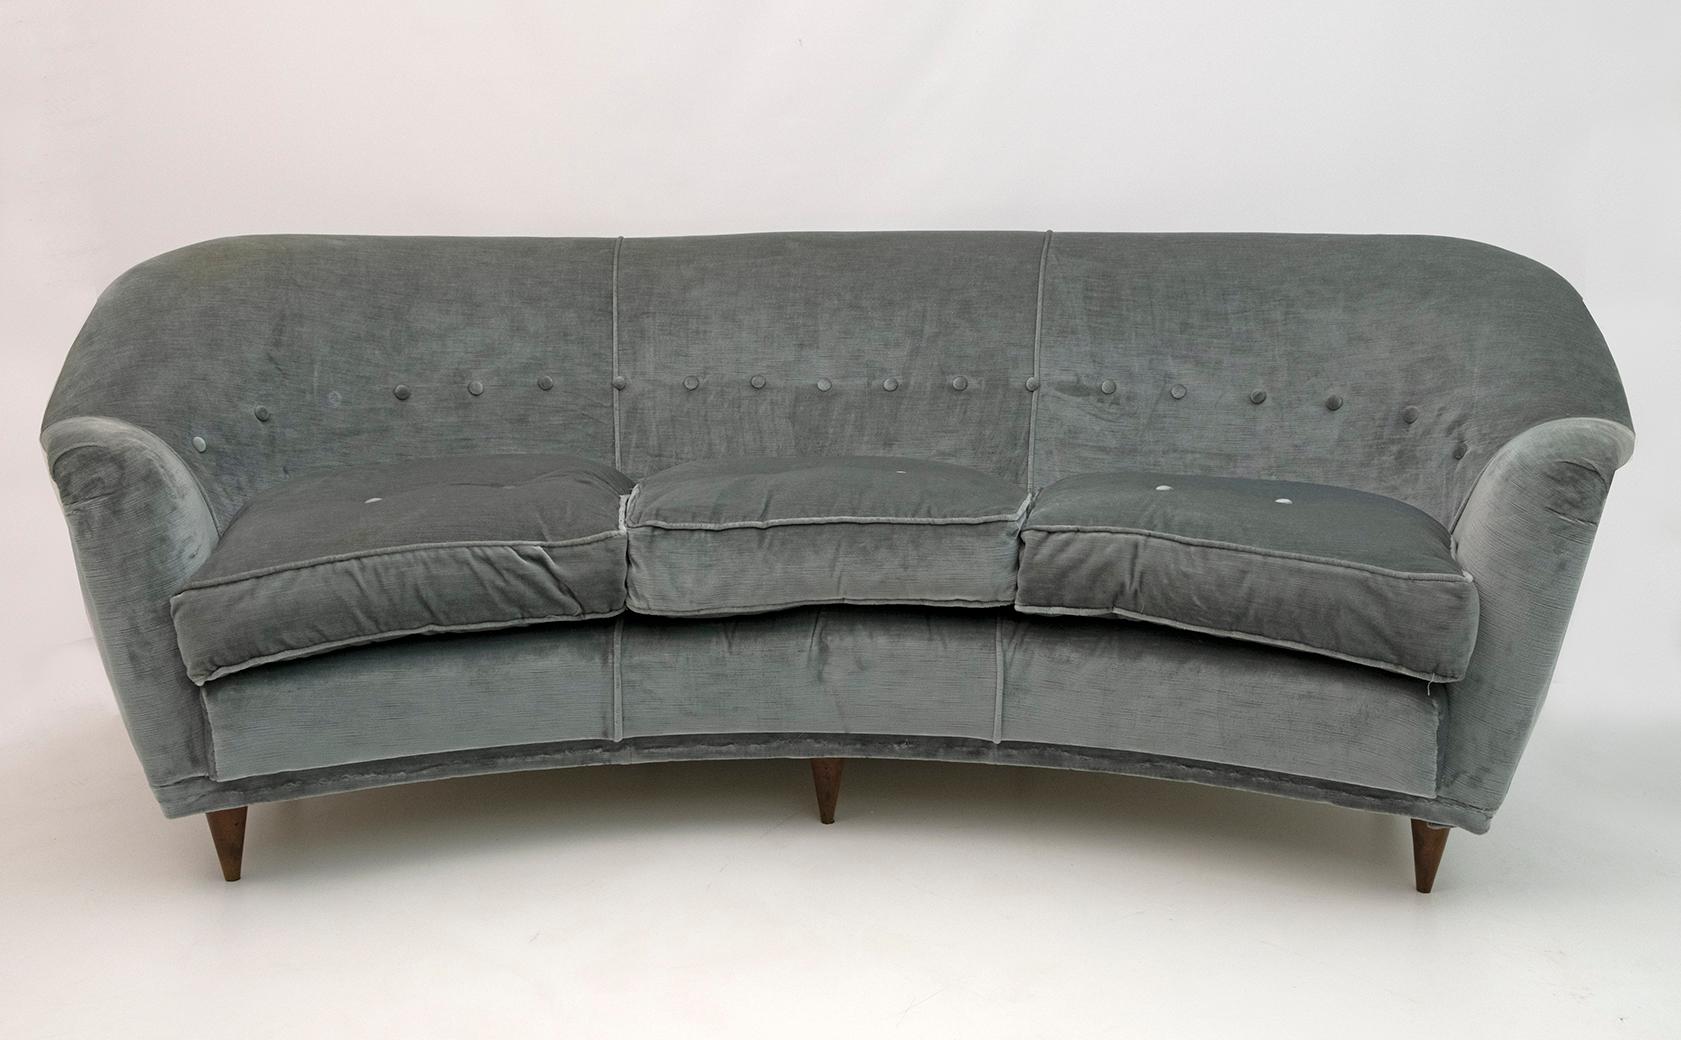 Rare sofa and two armchairs by Gio Ponti for Casa e Giardino from the 1950s, three-seater sofa and armchairs with curved backrest
The set was reupholstered over twenty years ago, but the velvet is worn and I recommend a new upholstery.

The